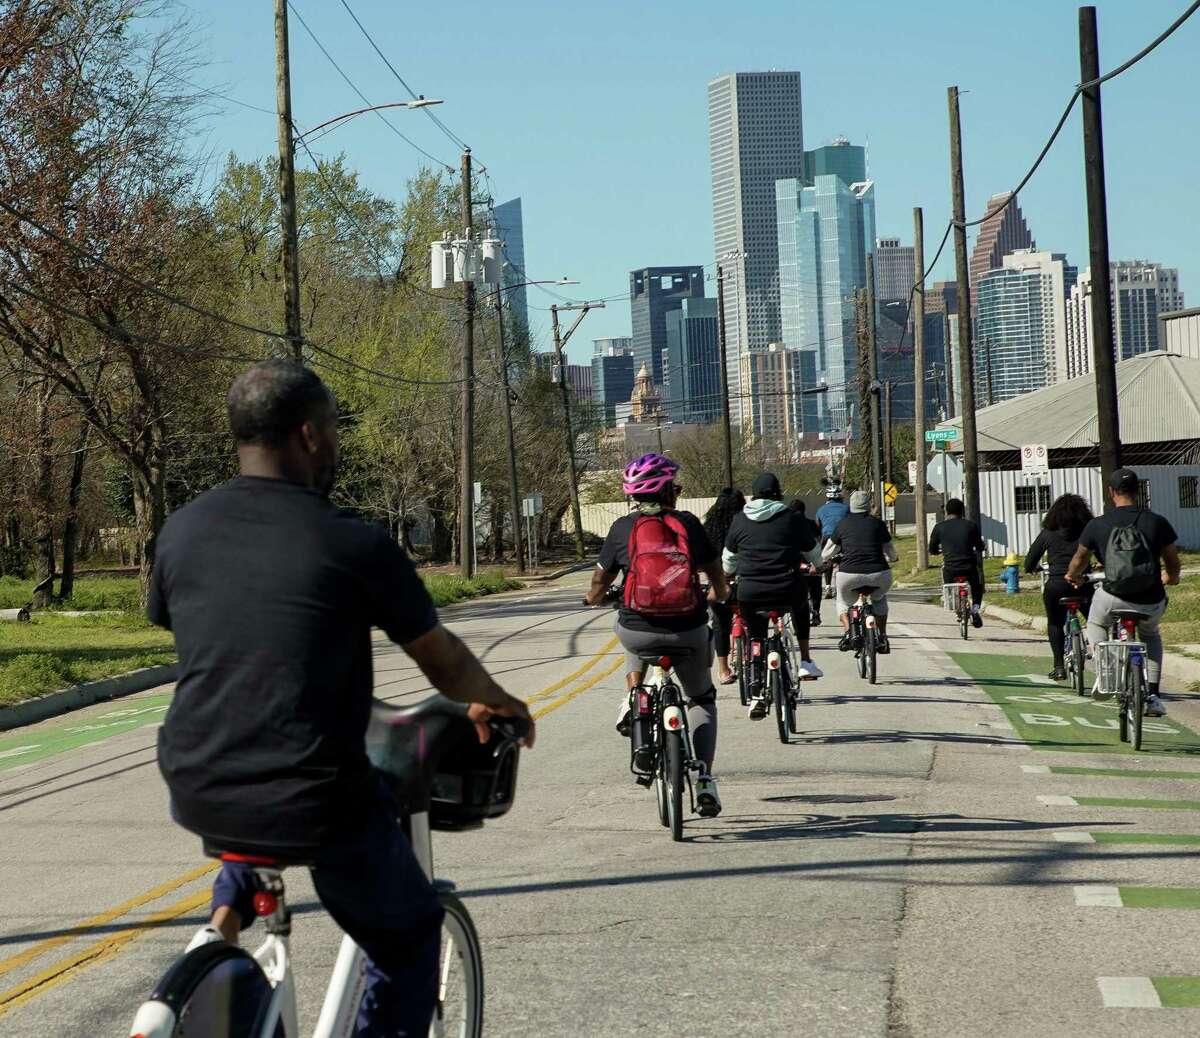 Our Afrikan Family takes people through the "Storytime Bike Line" tour, a bike tour of Fifth Ward to teach residents and non-residents about the rich history of one of Houston's oldest Black neighborhoods, on Saturday, March 19, 2022, in Houston.